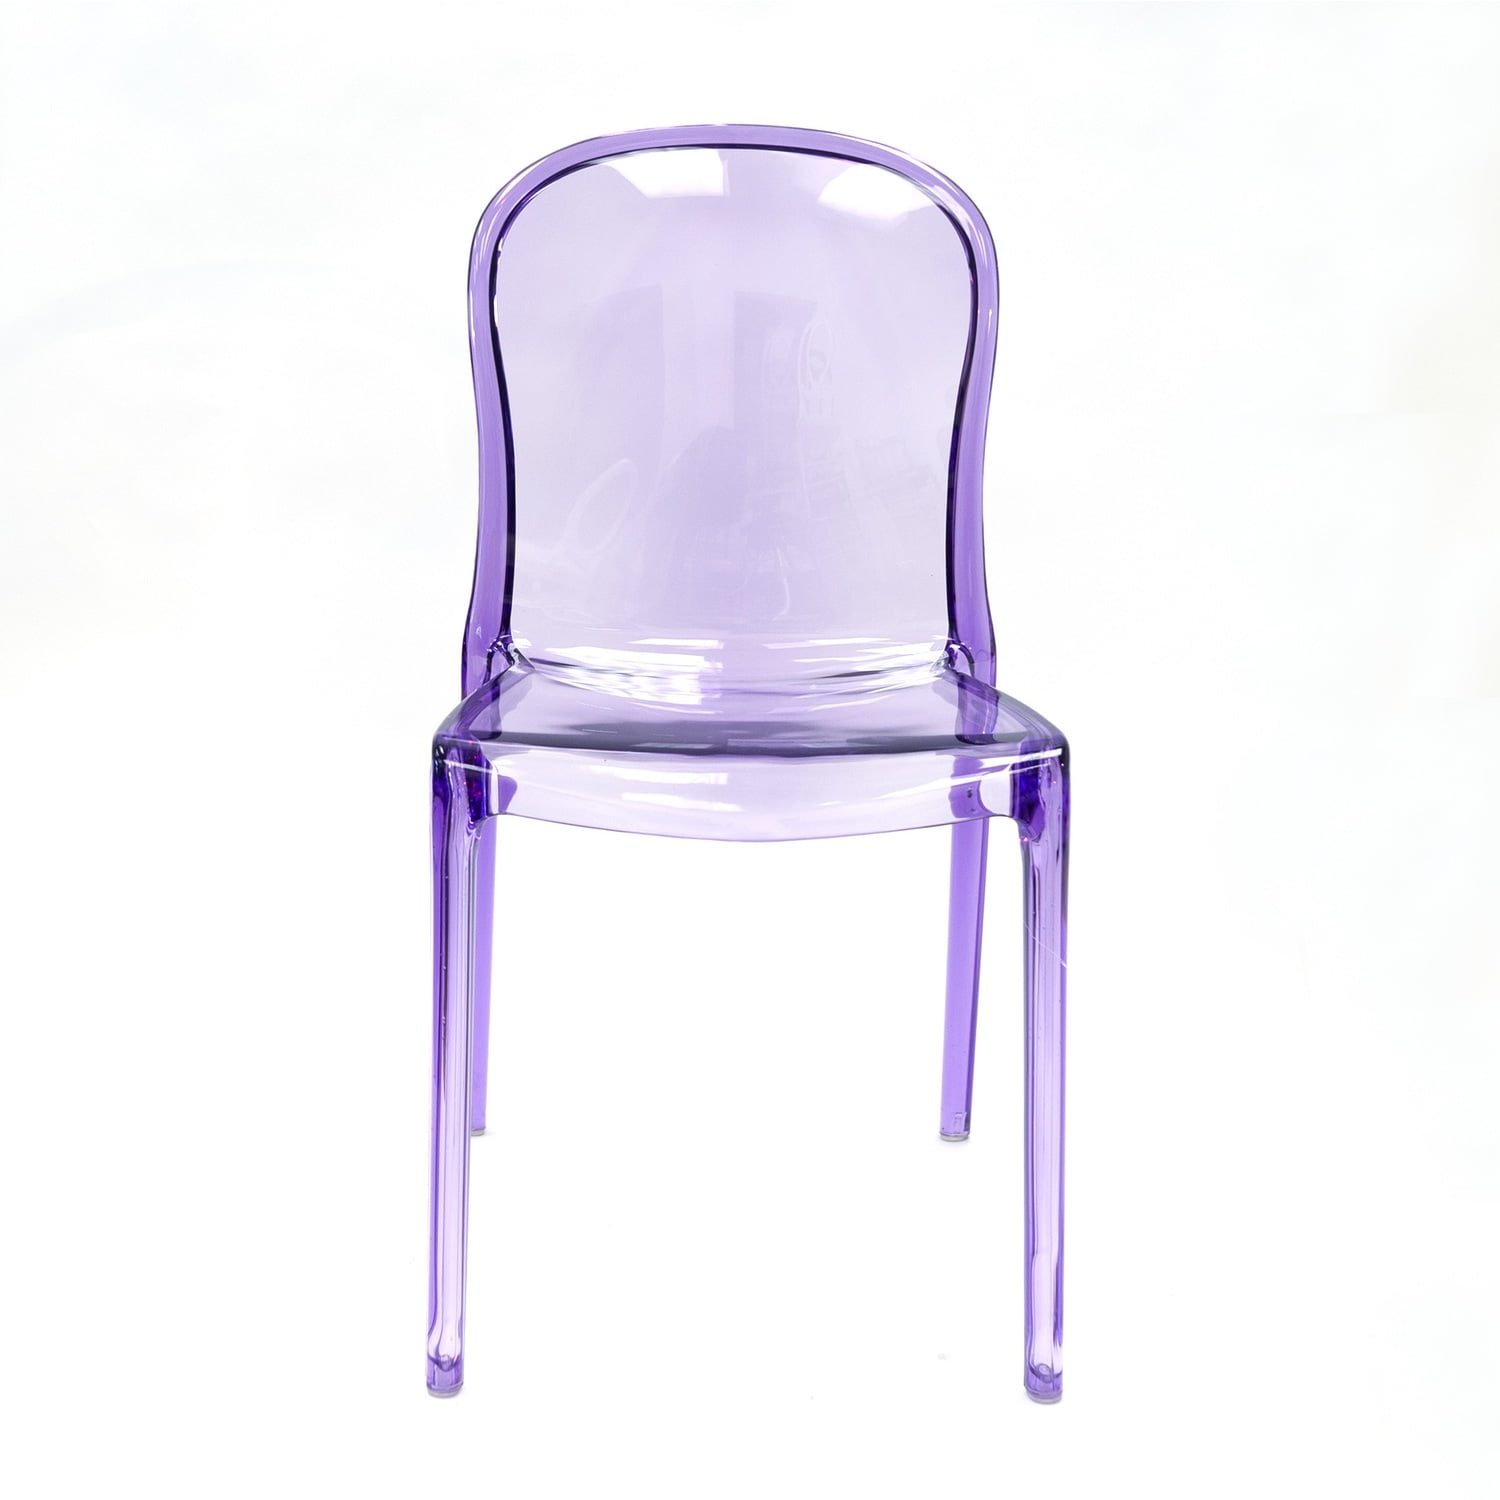 Rpc-genoa-pur Genoa Polycarbonate Dining Chair - Purple - 33 In.